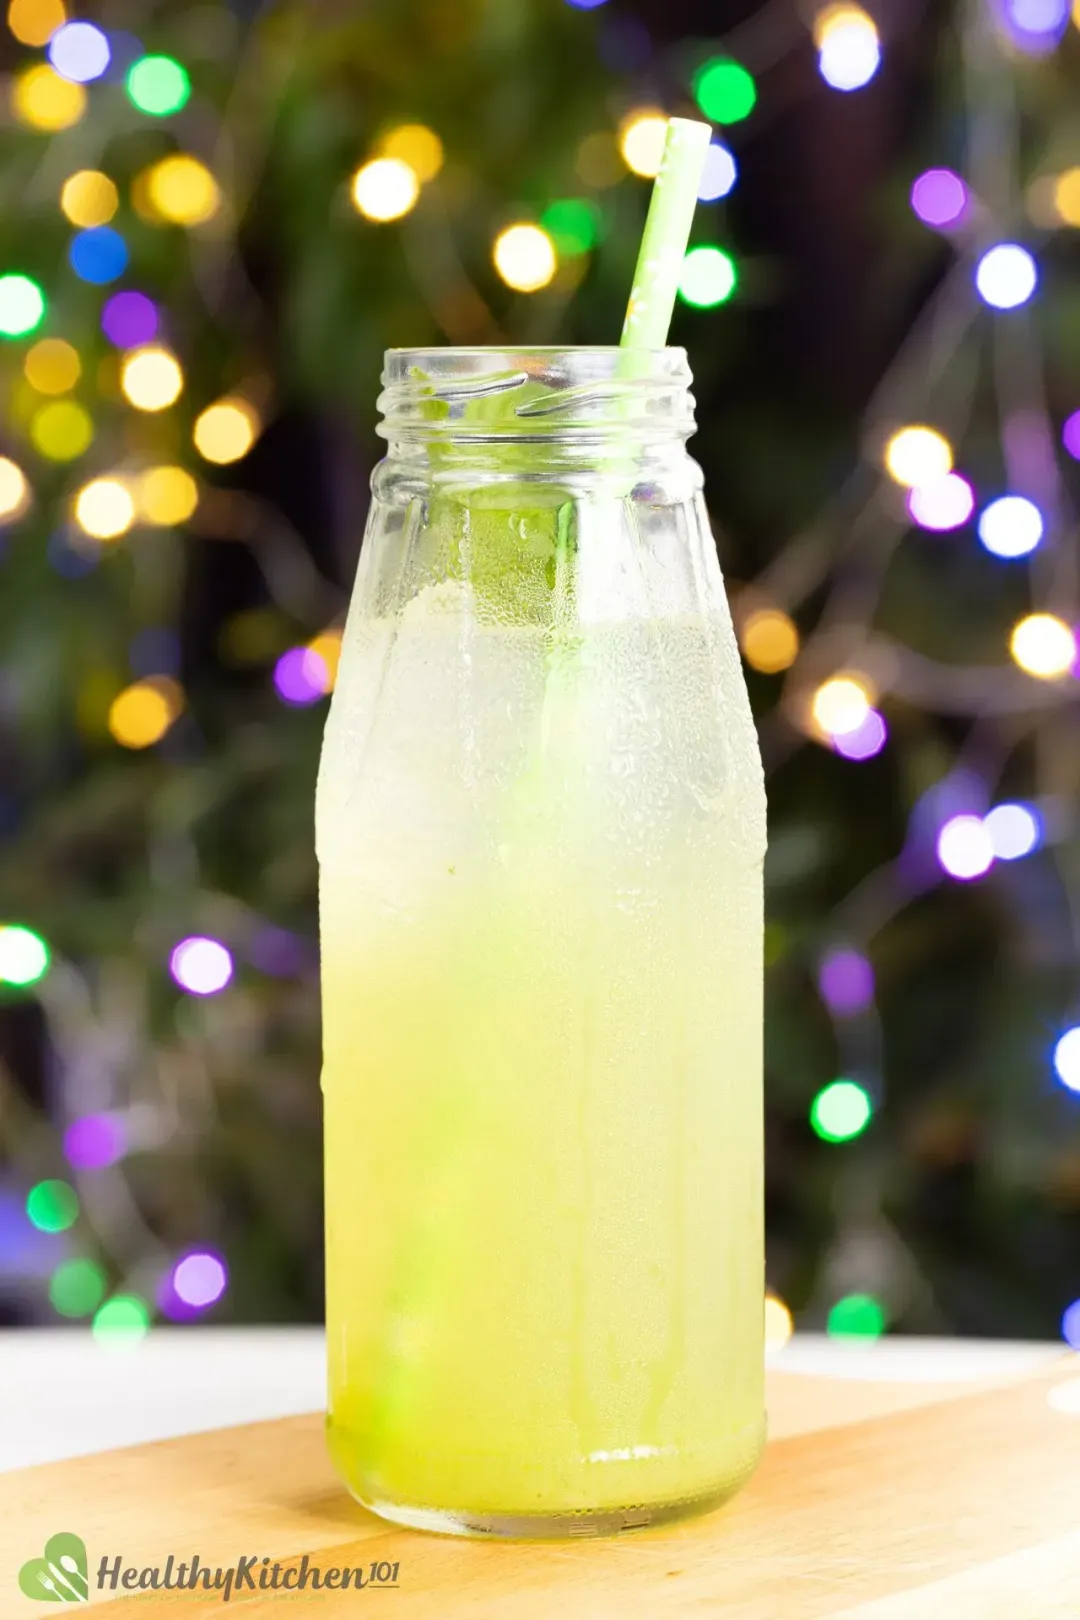 A jar of cucumber lime juice with a straw taken in front of a Christmas tree